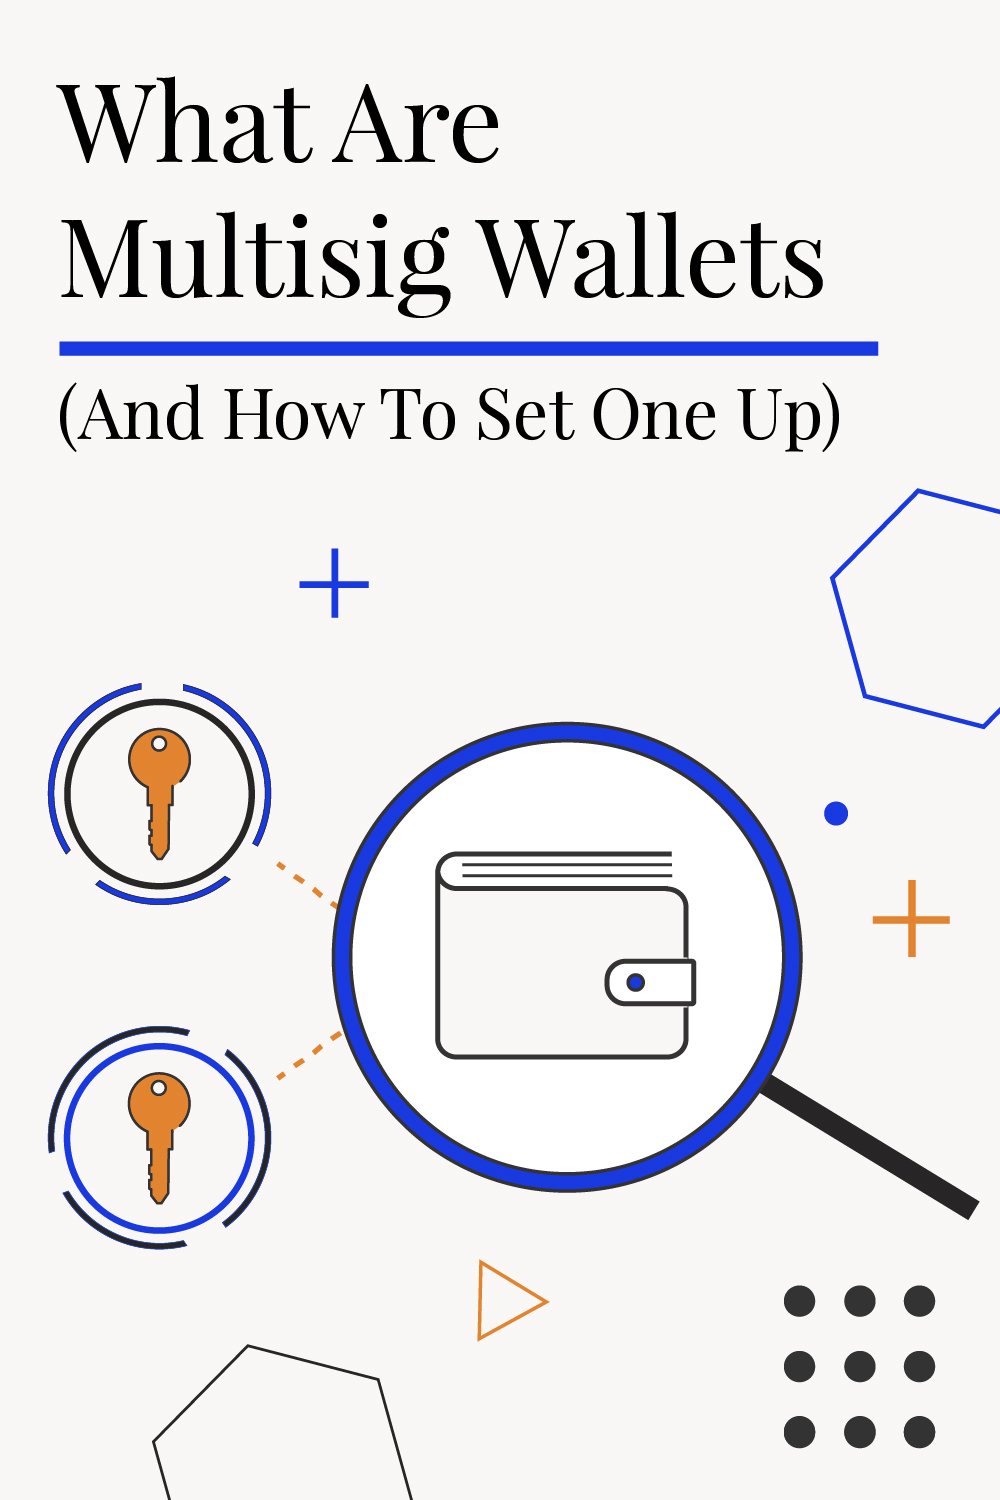 What Are Multisig Wallets (And How To Set One Up)